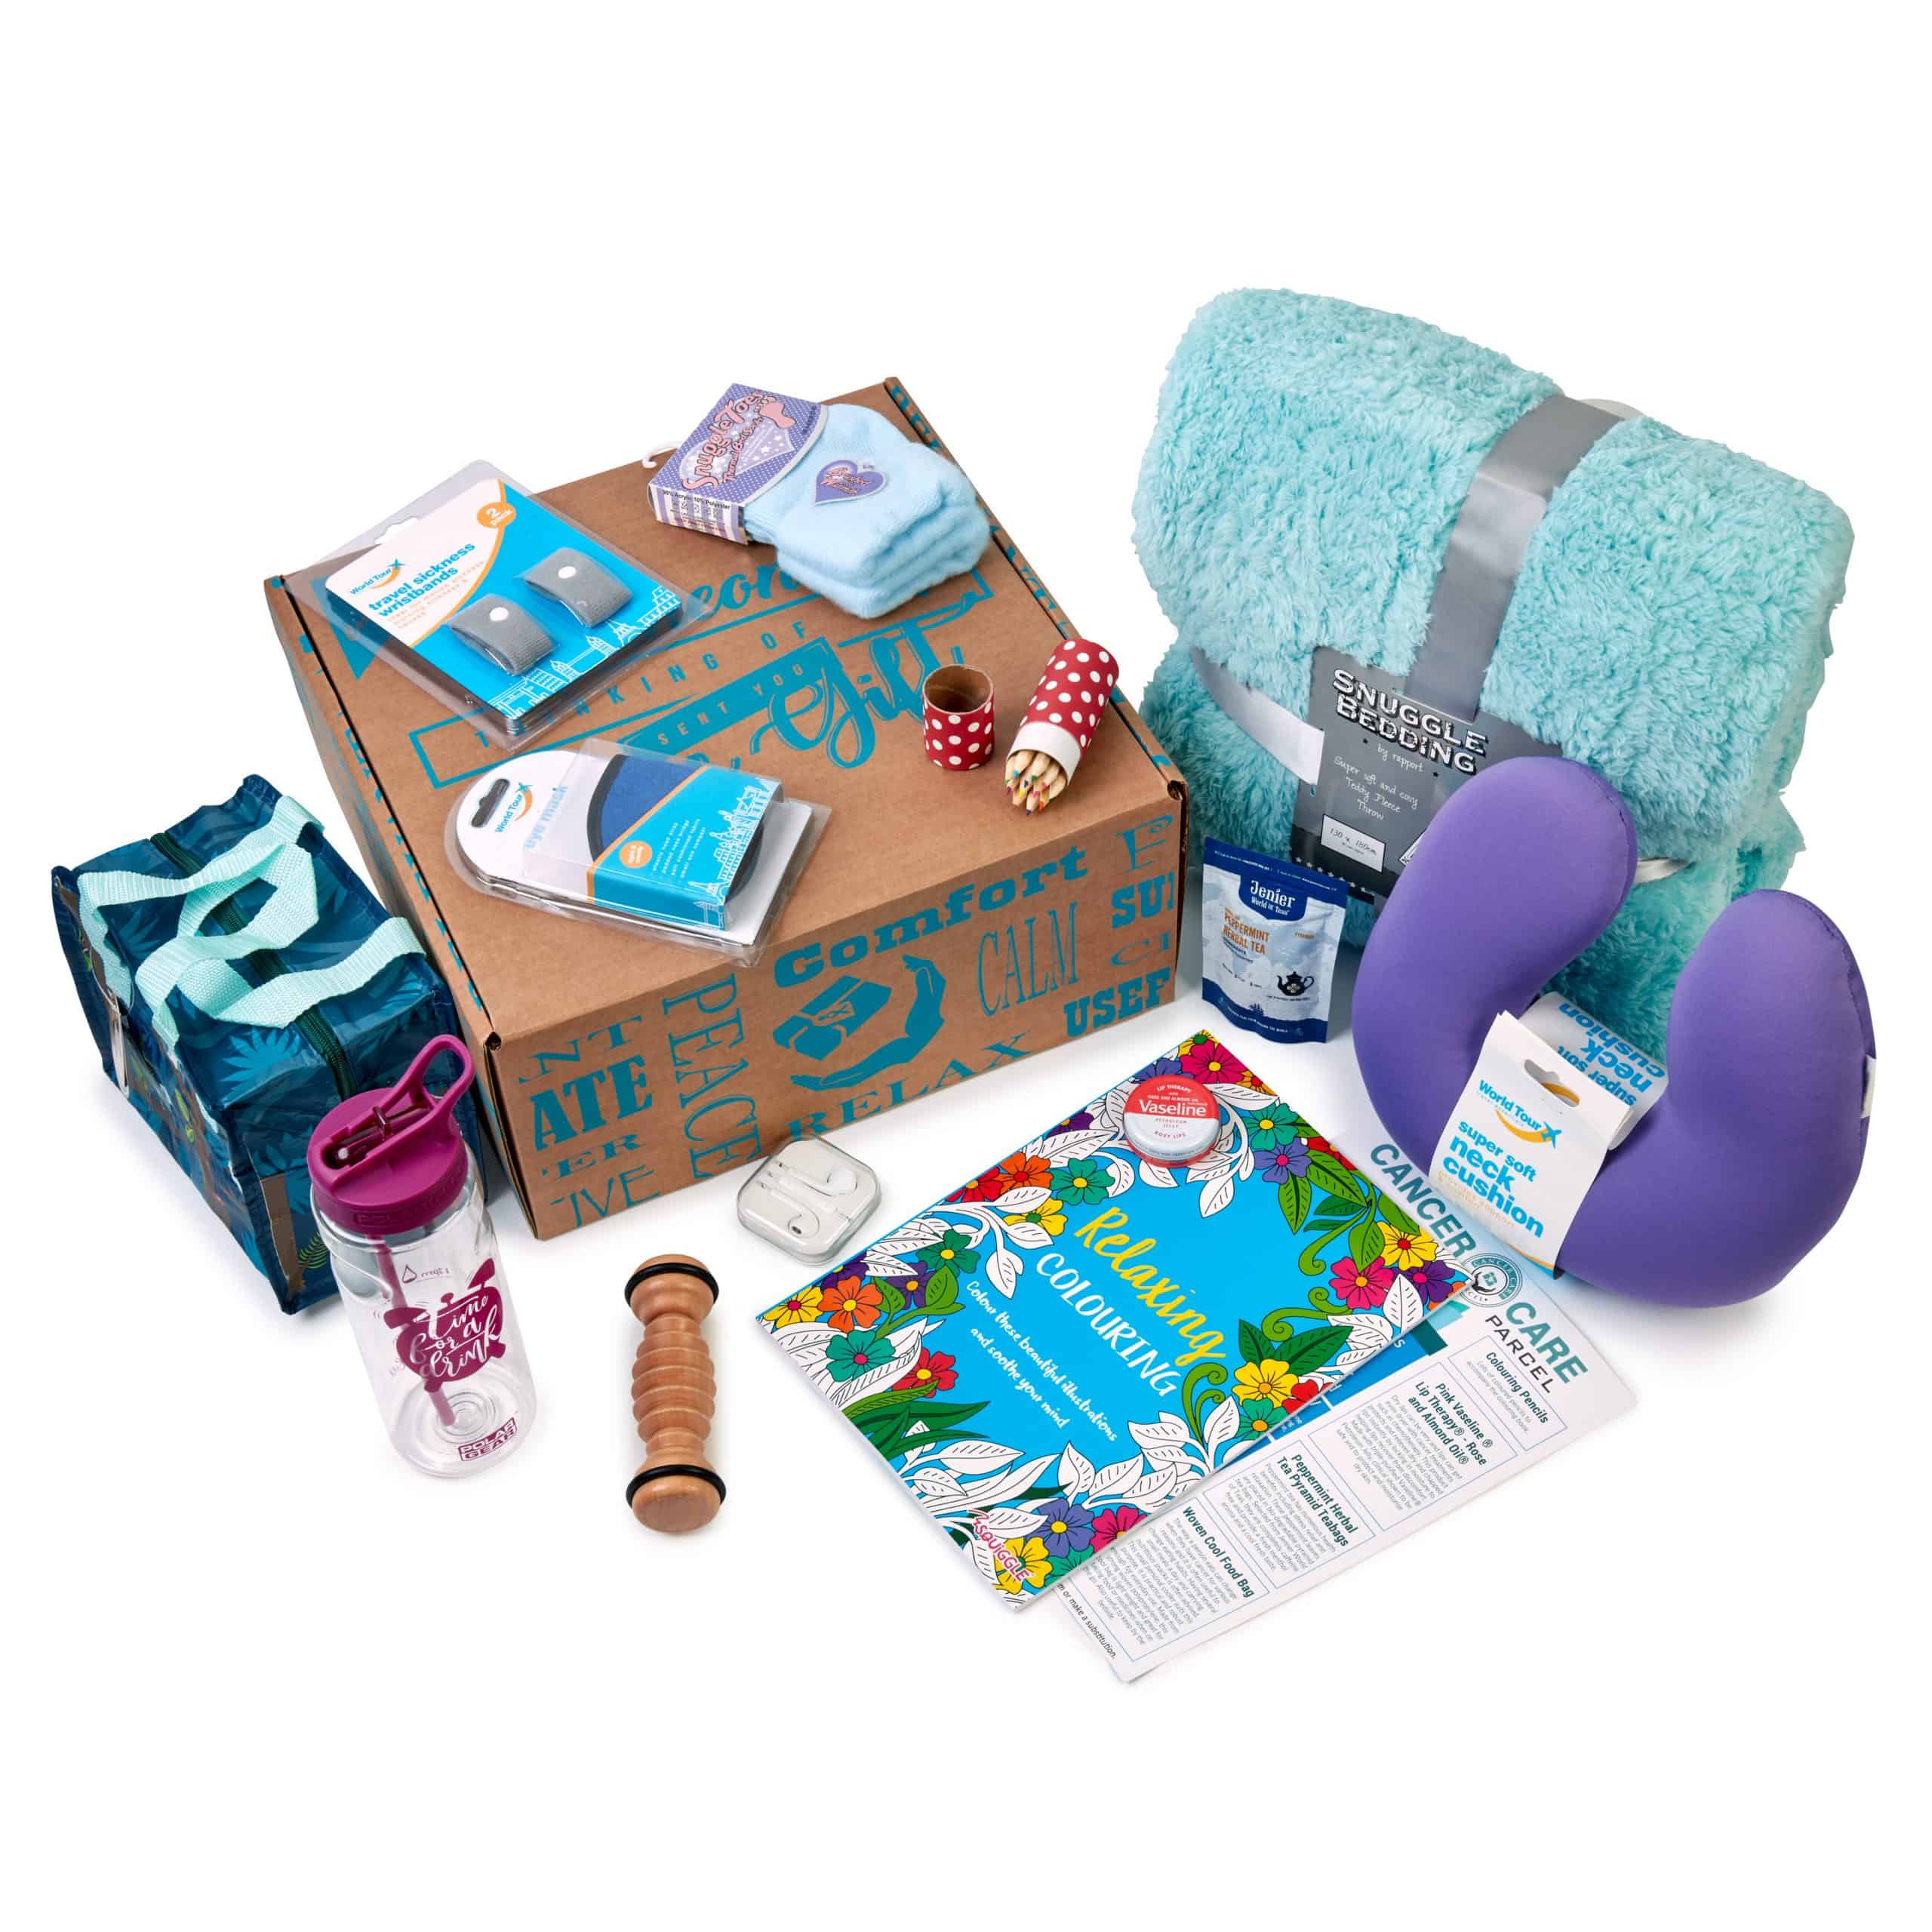 Cancer Care Package , Chemotherapy Care Package for Women Breast Cancer ,  Get Well Soon Gift Box , Chemo Breast Cancer Gifts 